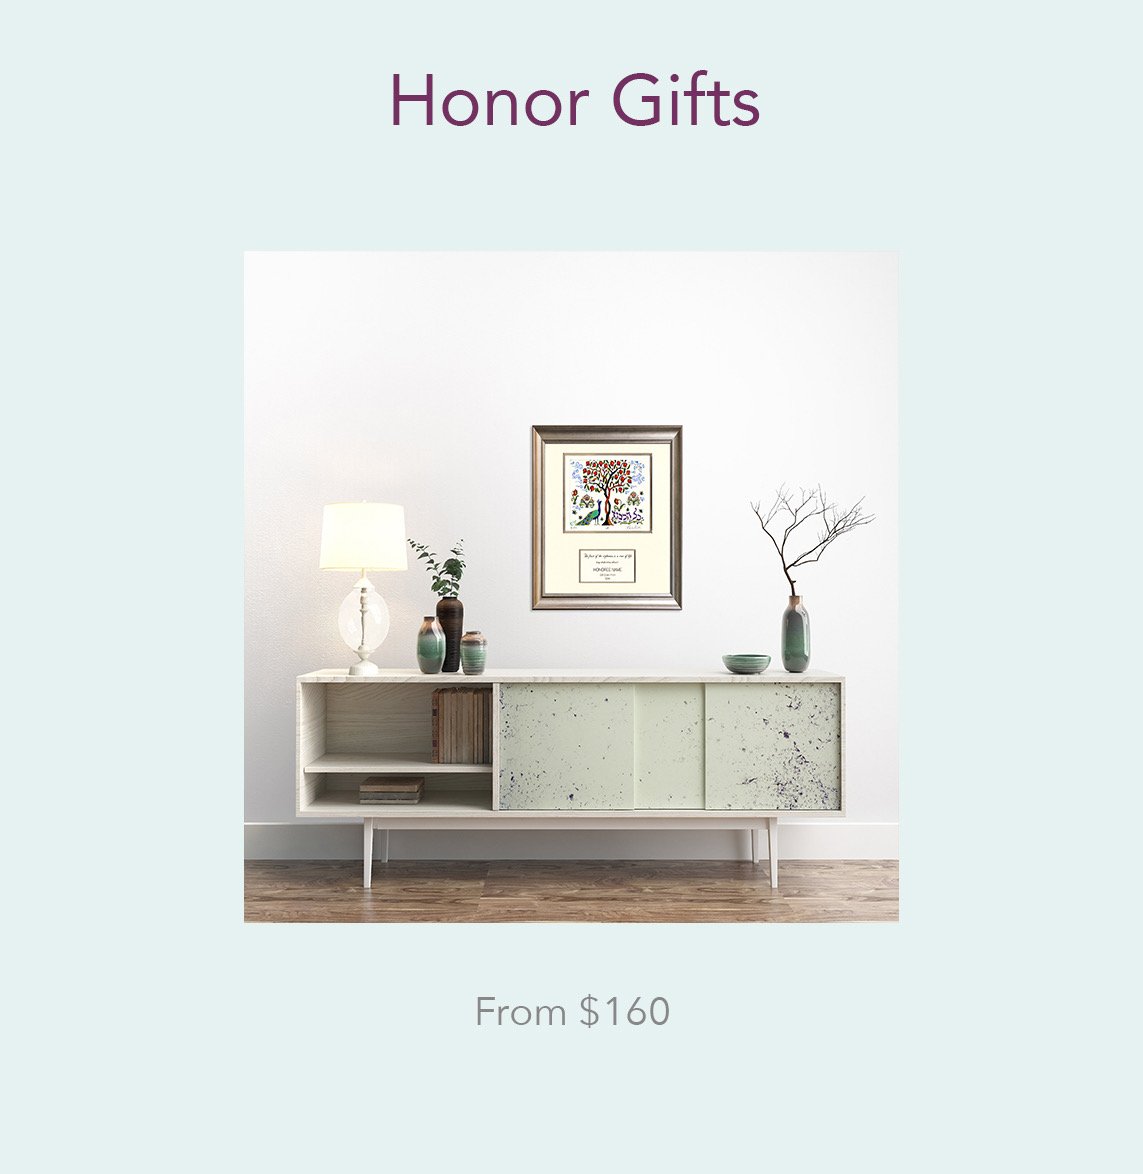 Honor Gifts